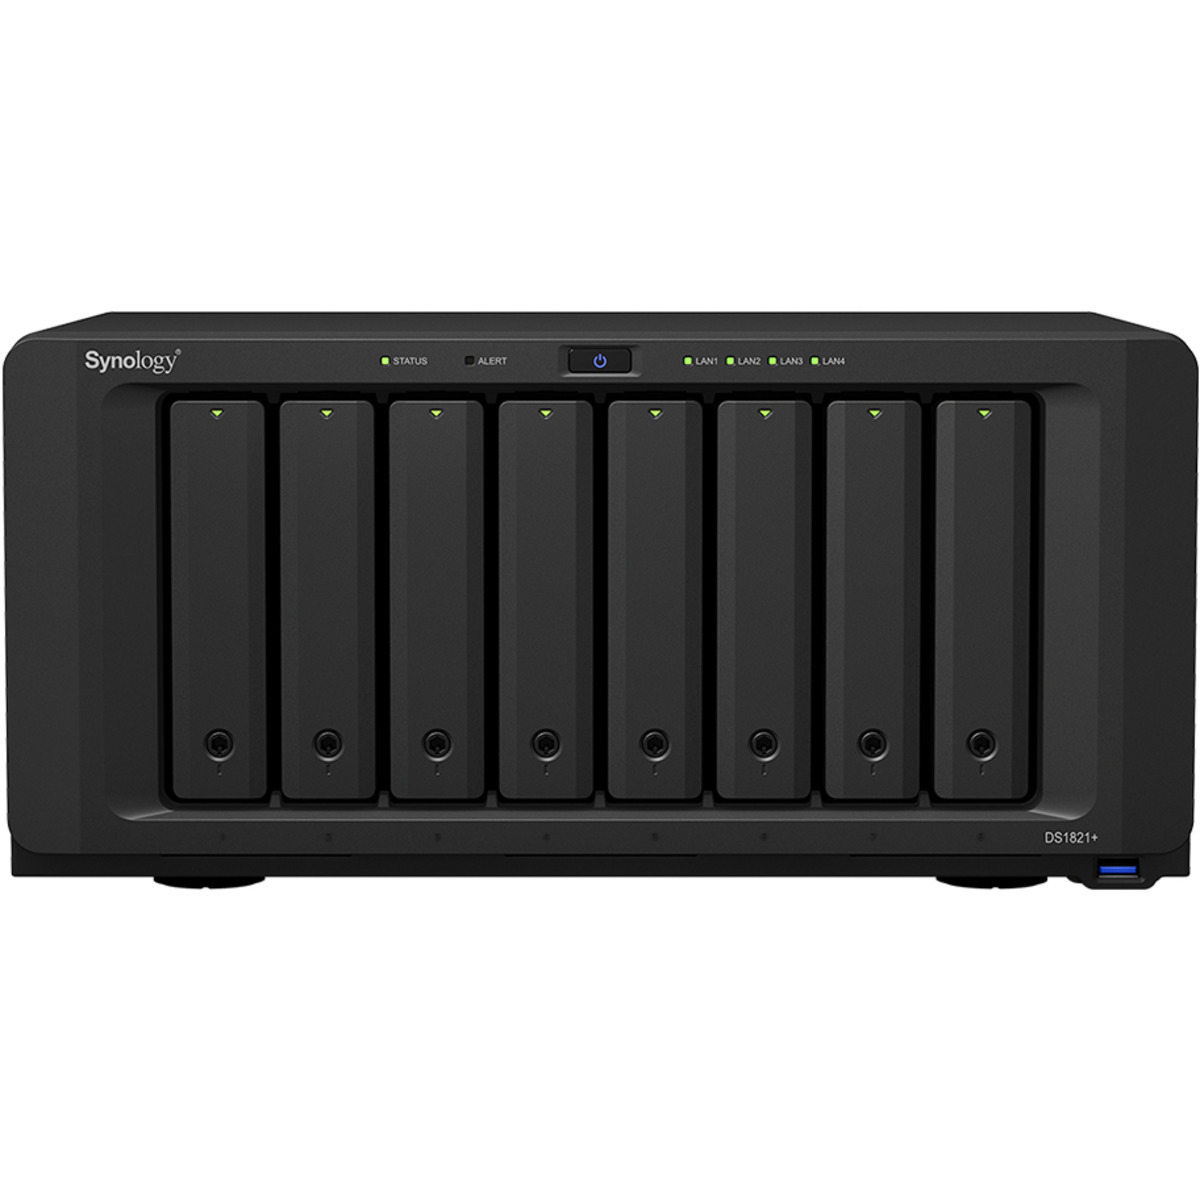 Synology DiskStation DS1821+ 160tb 8-Bay Desktop Multimedia / Power User / Business NAS - Network Attached Storage Device 8x20tb Western Digital Red Pro WD201KFGX 3.5 7200rpm SATA 6Gb/s HDD NAS Class Drives Installed - Burn-In Tested - FREE RAM UPGRADE DiskStation DS1821+